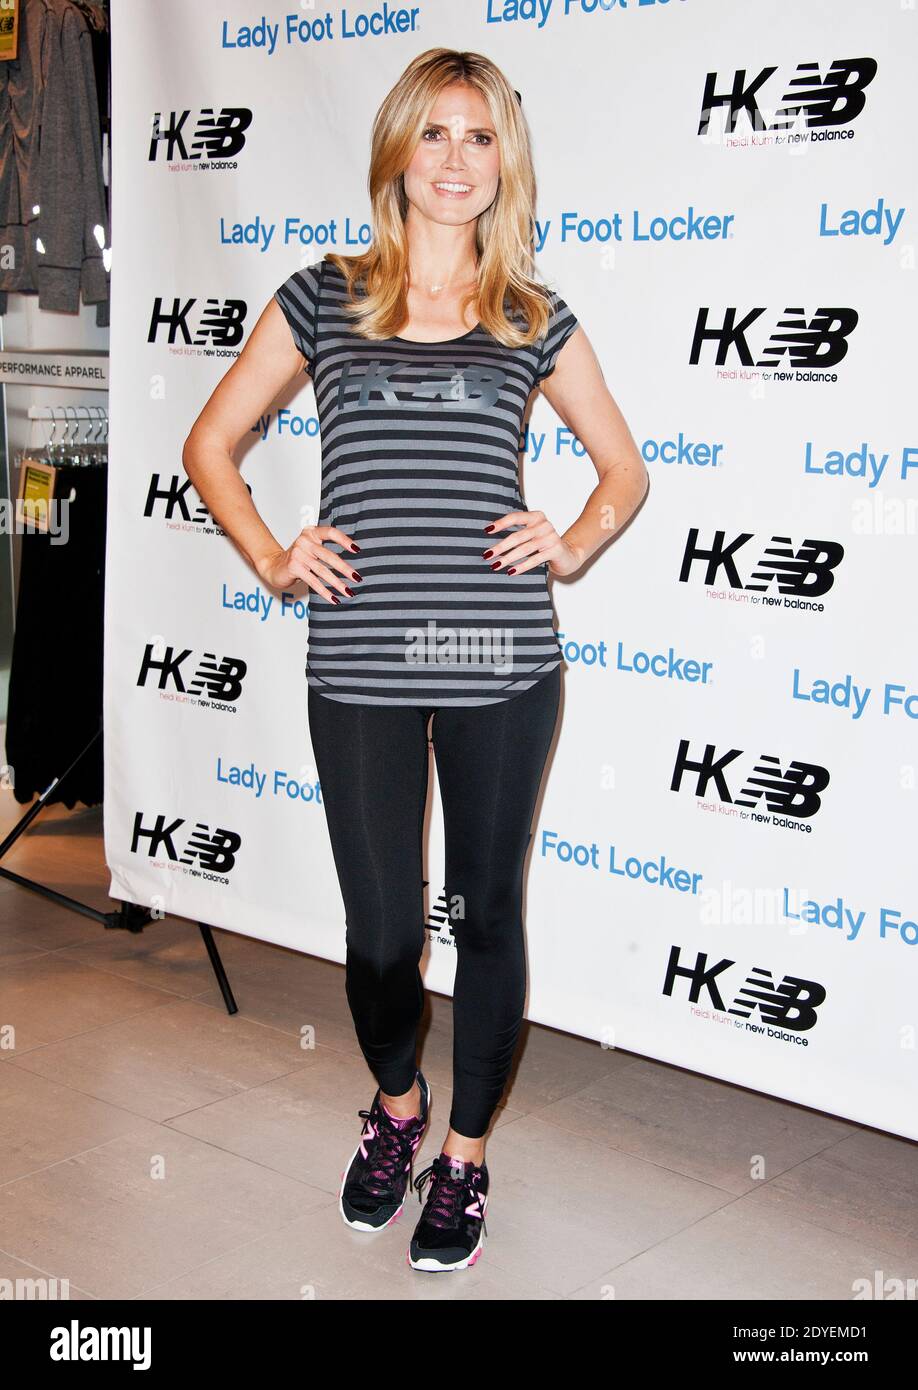 Heidi Klum new Heidi Klum for New Balance collection on March 14, 2013 in Los Angeles, California. Photo by Lionel Hahn/ABACAPRESS.COM Stock Photo - Alamy